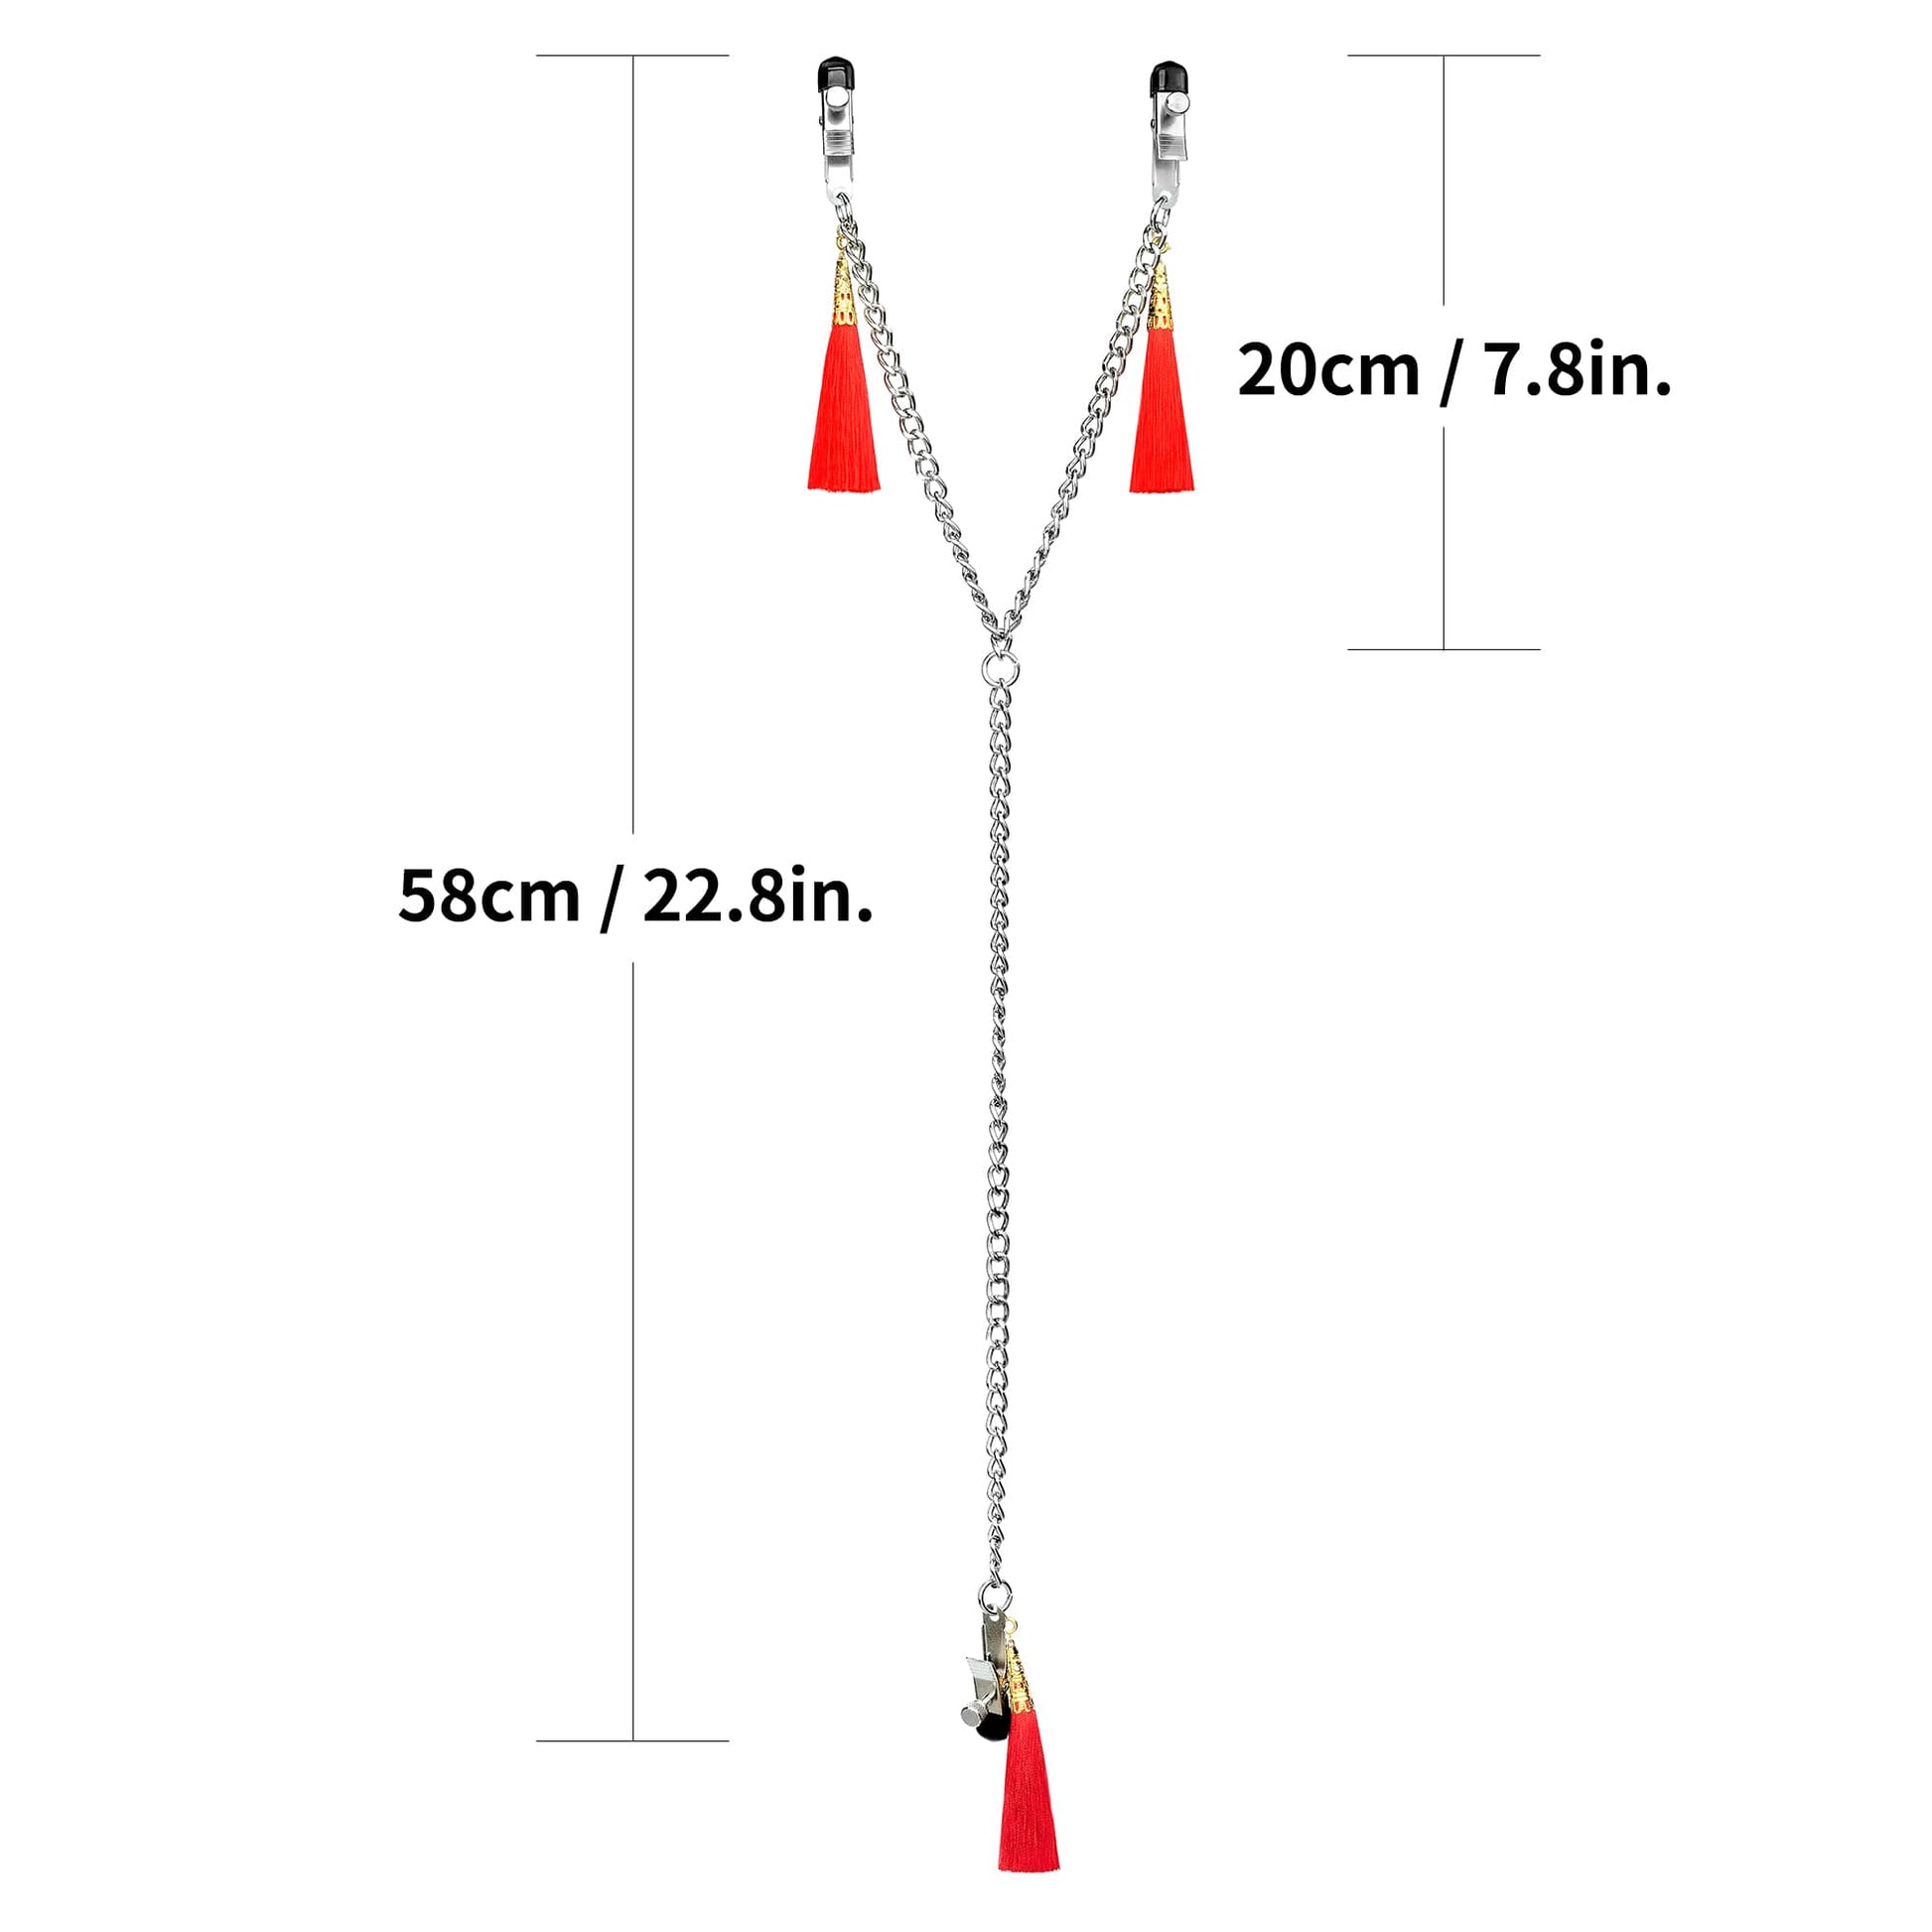 The size of the nipple clit tassel clamp with chain